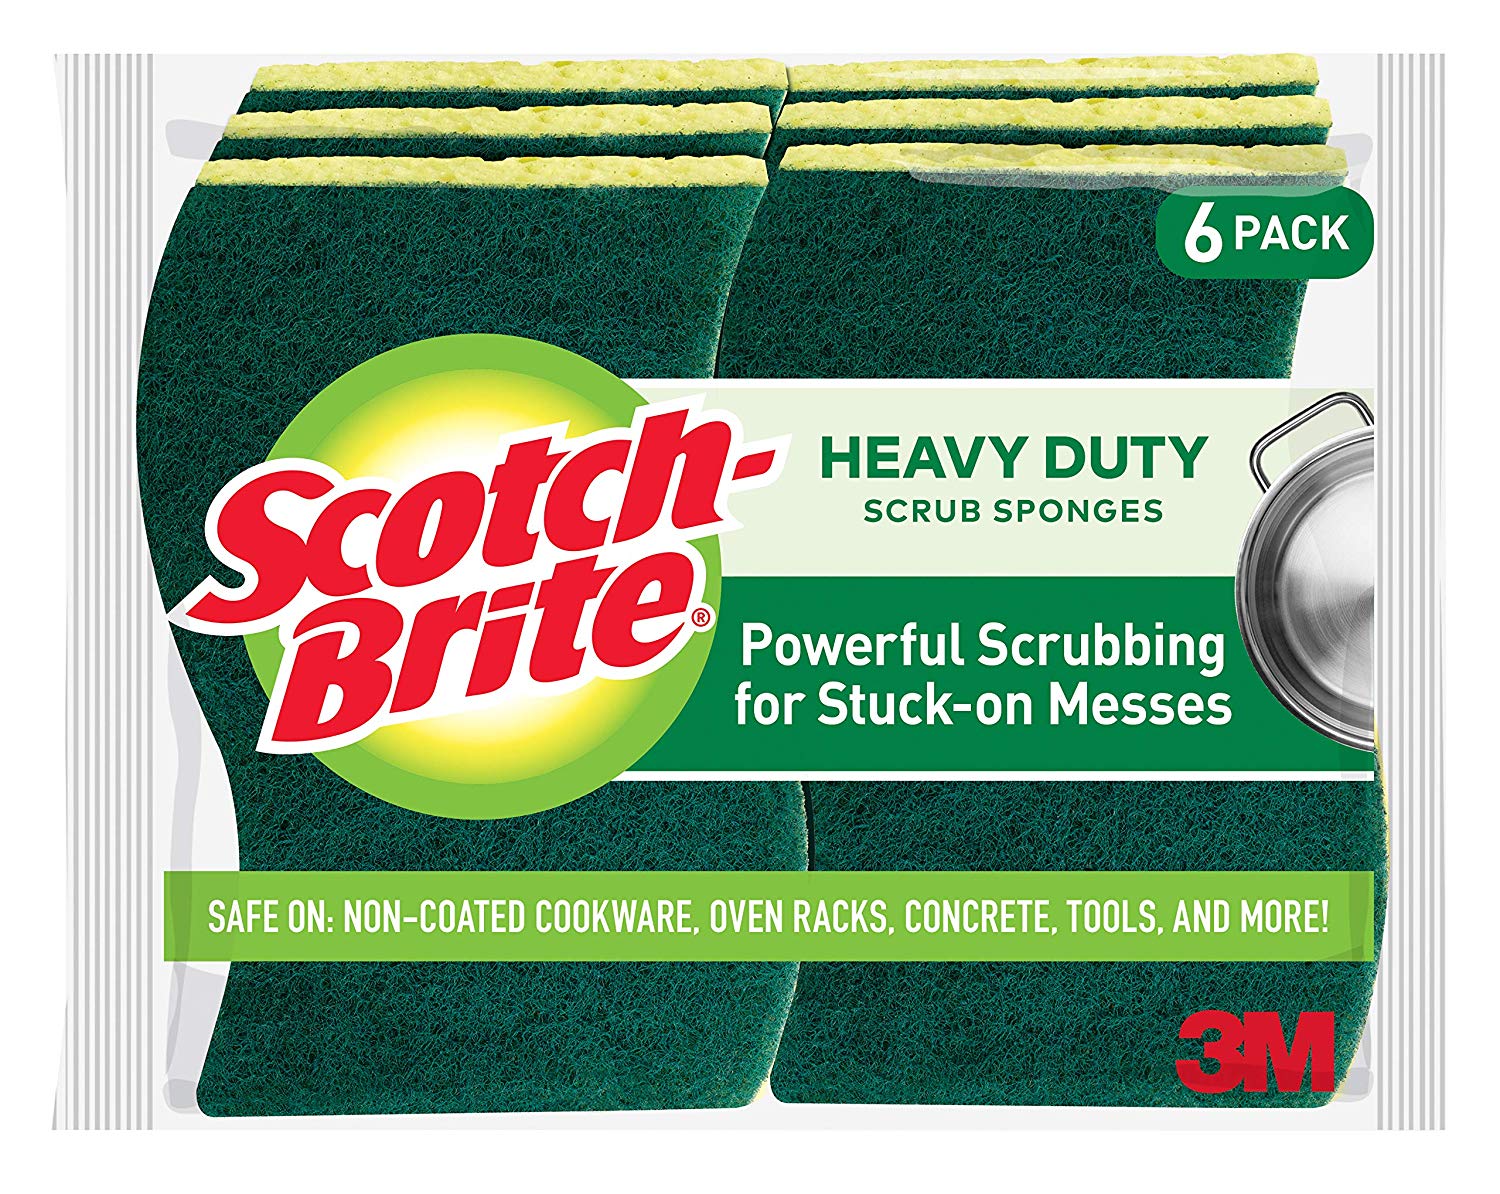 Scotch-Brite Heavy Duty Scrub Sponges, Powerful Scrubbing for Stuck-on Messes, Stands Up to Stuck-on Grime, 6 Scrub Sponges